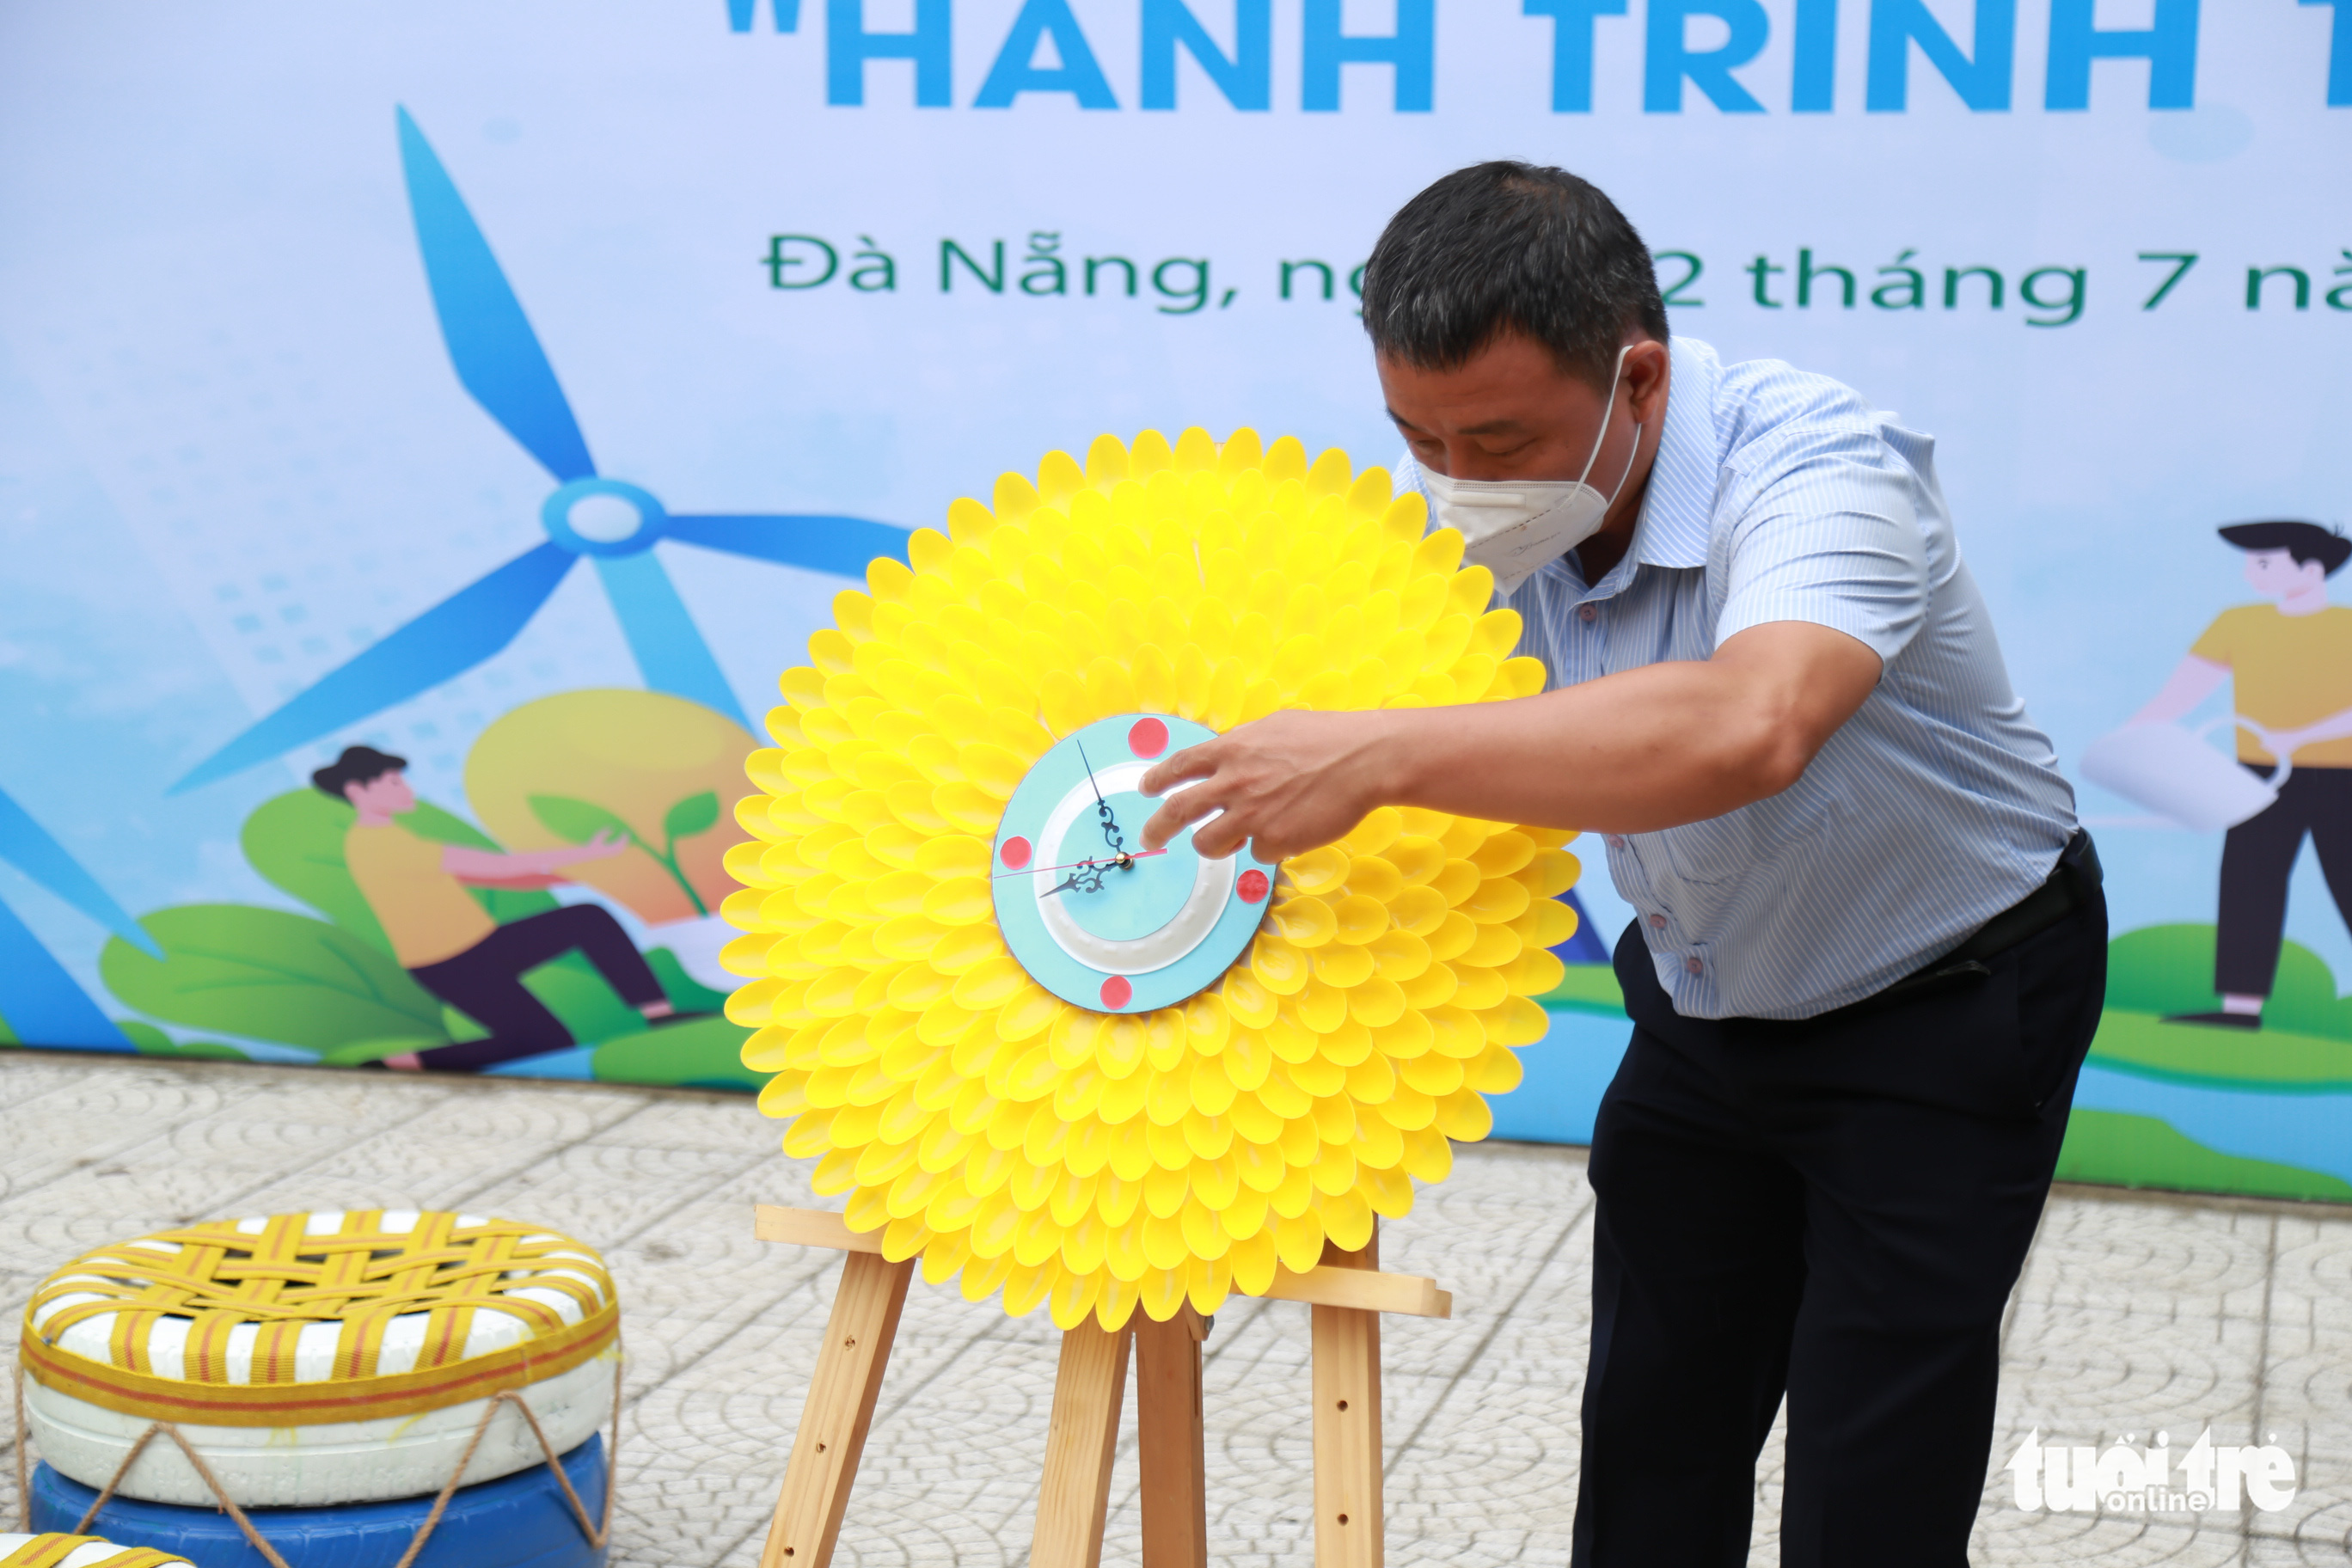 A wall clock made from plastic spoons is presented at the event. Photo: Doan Nhan / Tuoi Tre